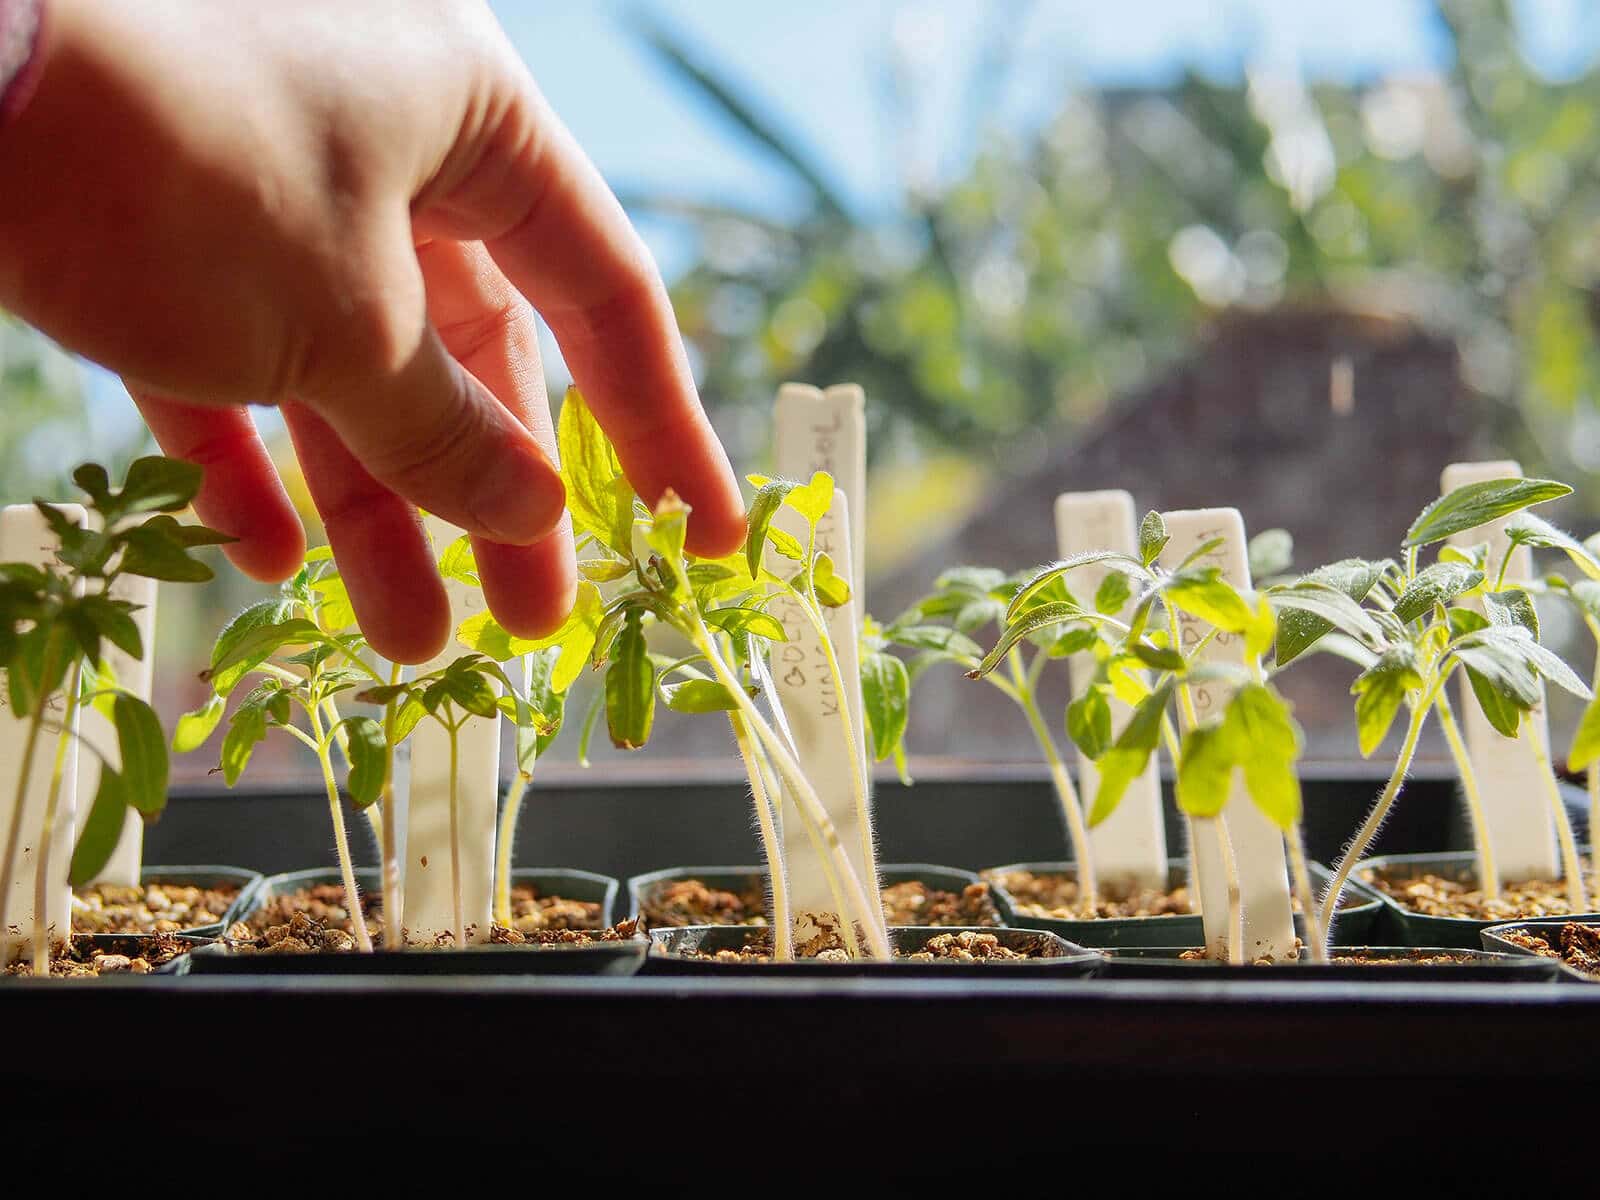 Brushing seedlings with your hand helps them develop stronger stems